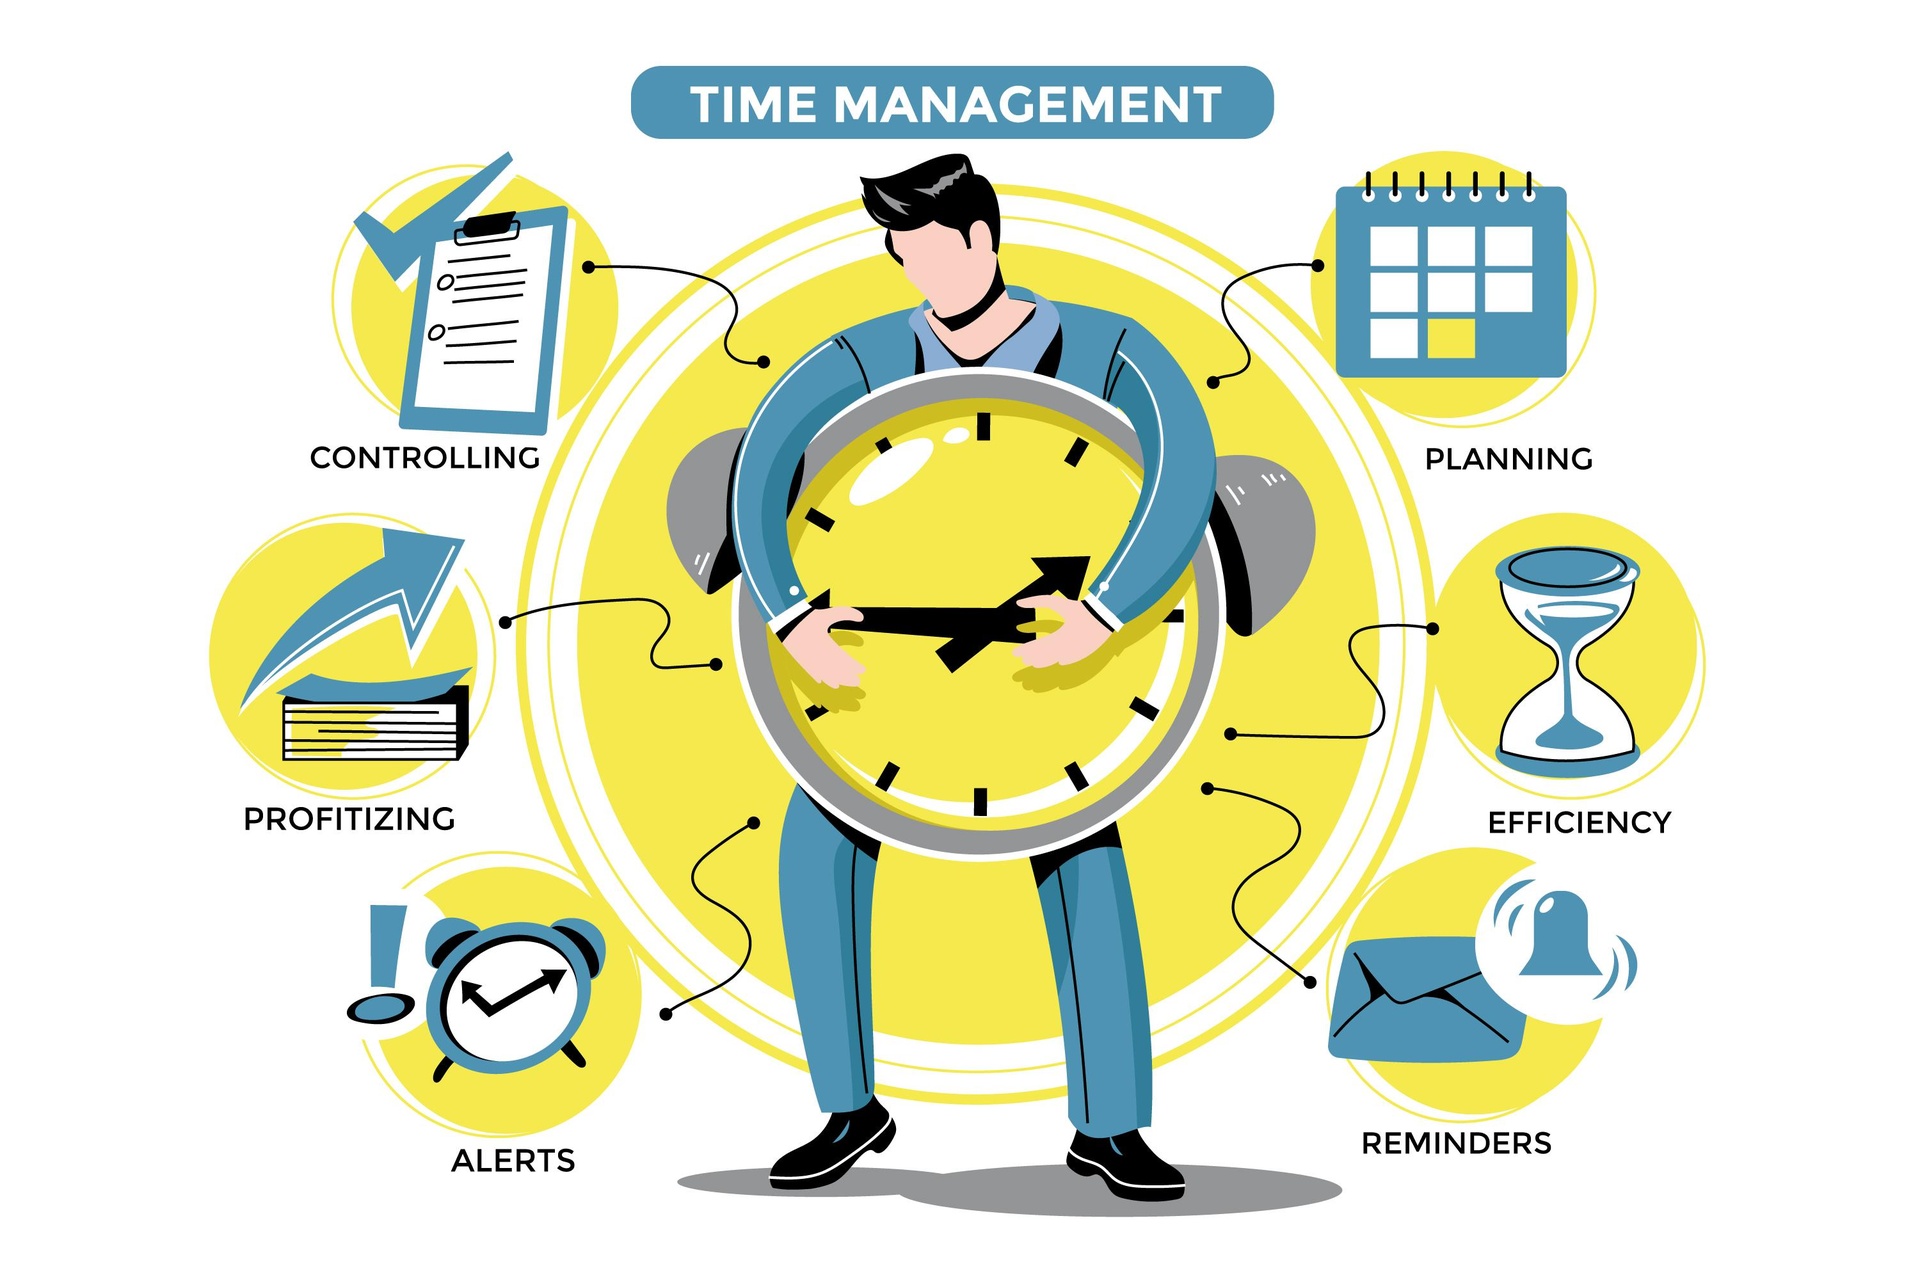 Time Management in Arabic